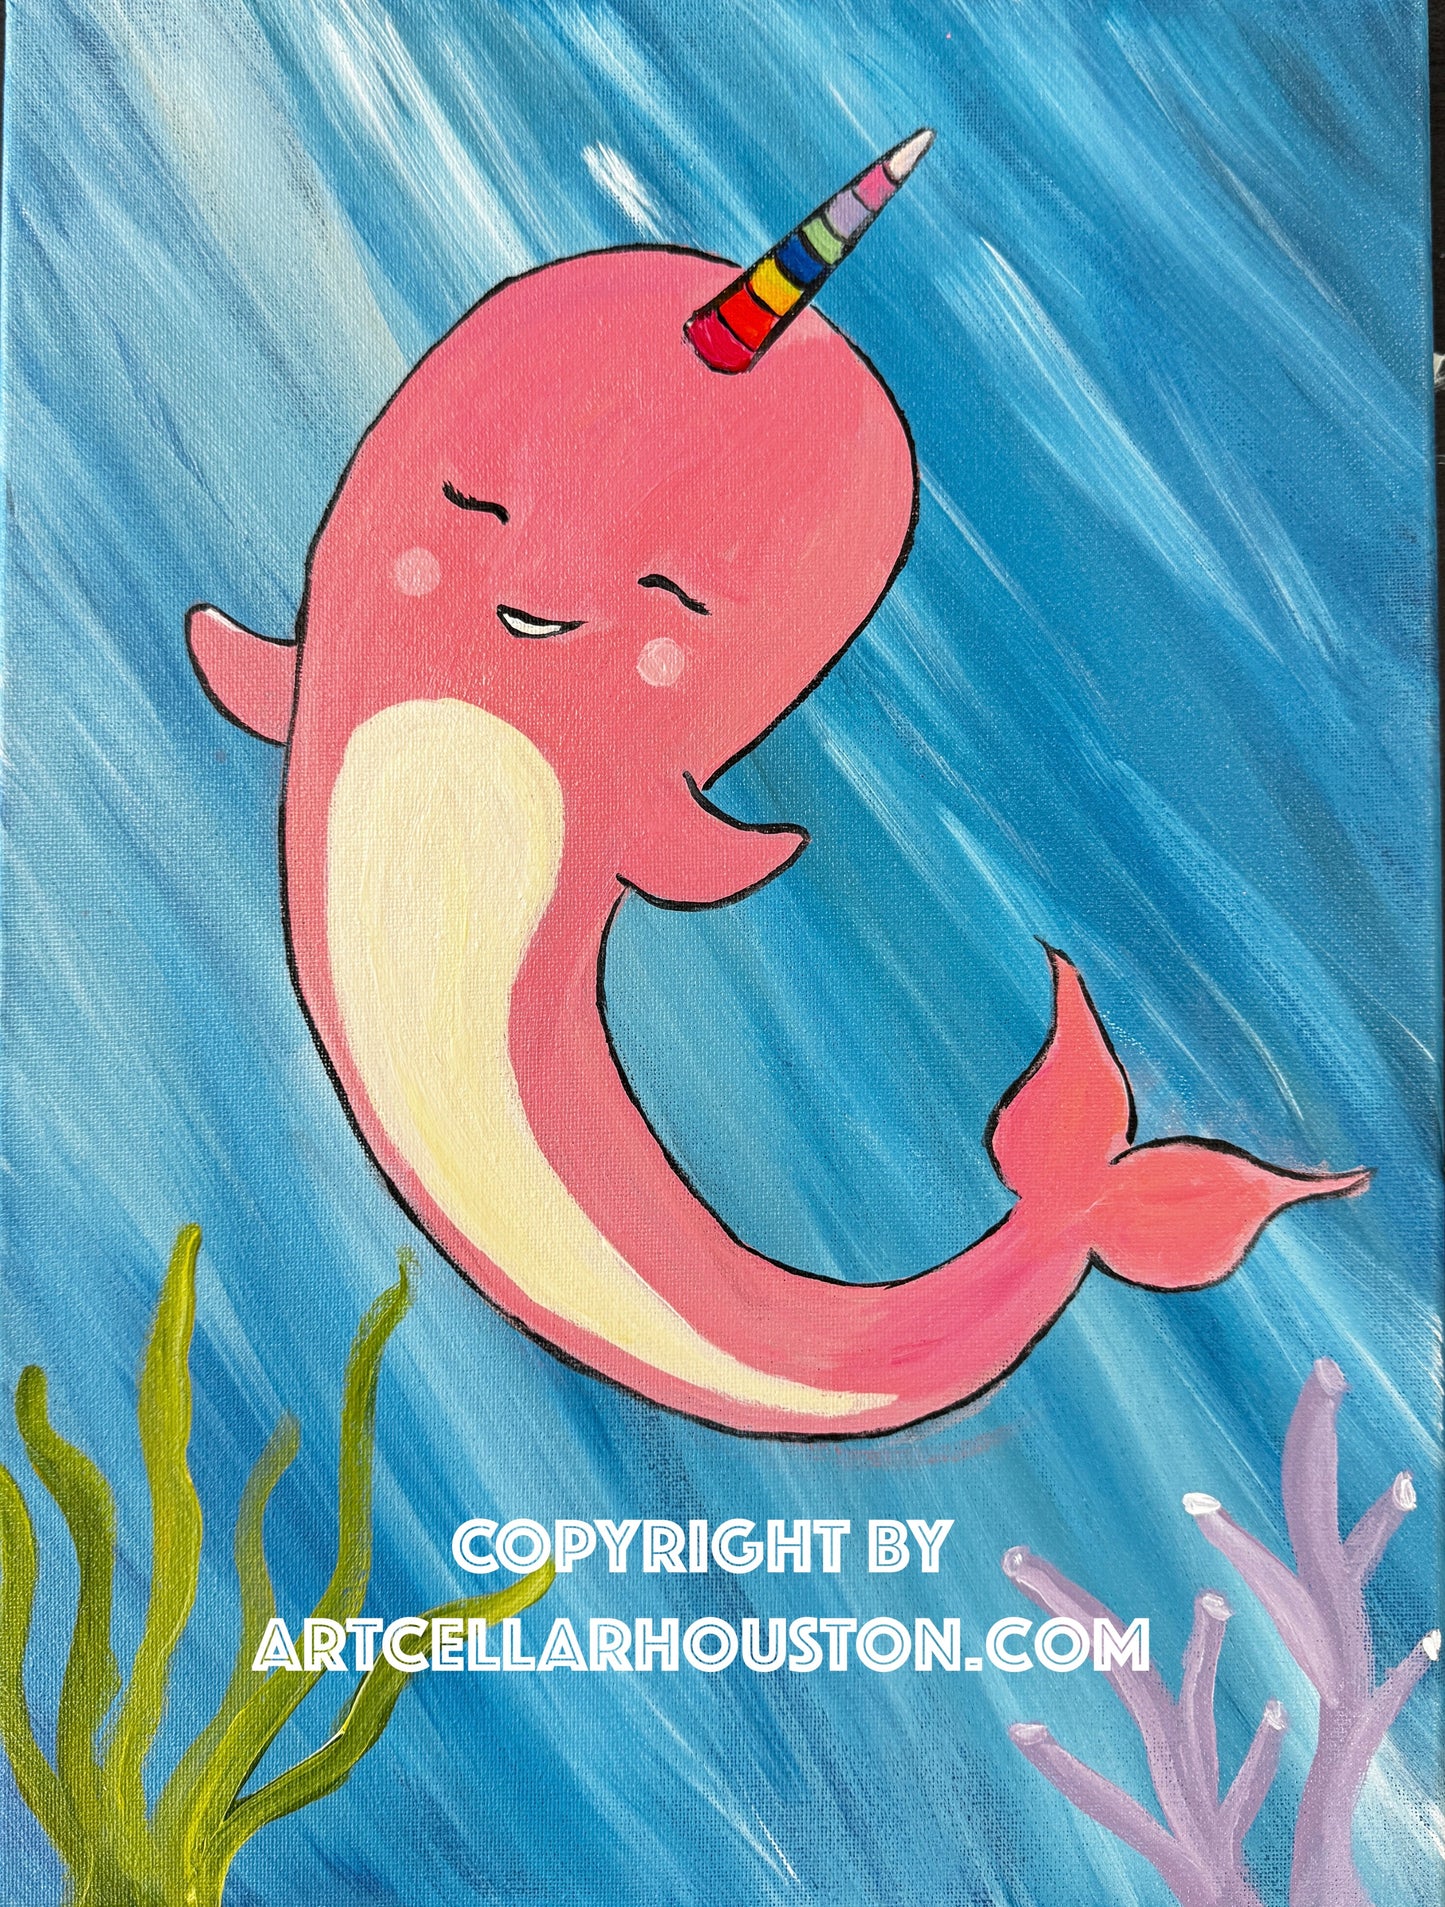 Wed, Feb 28th, 4-6P “Sweet Narwhal” Public Houston Kids Paint Class